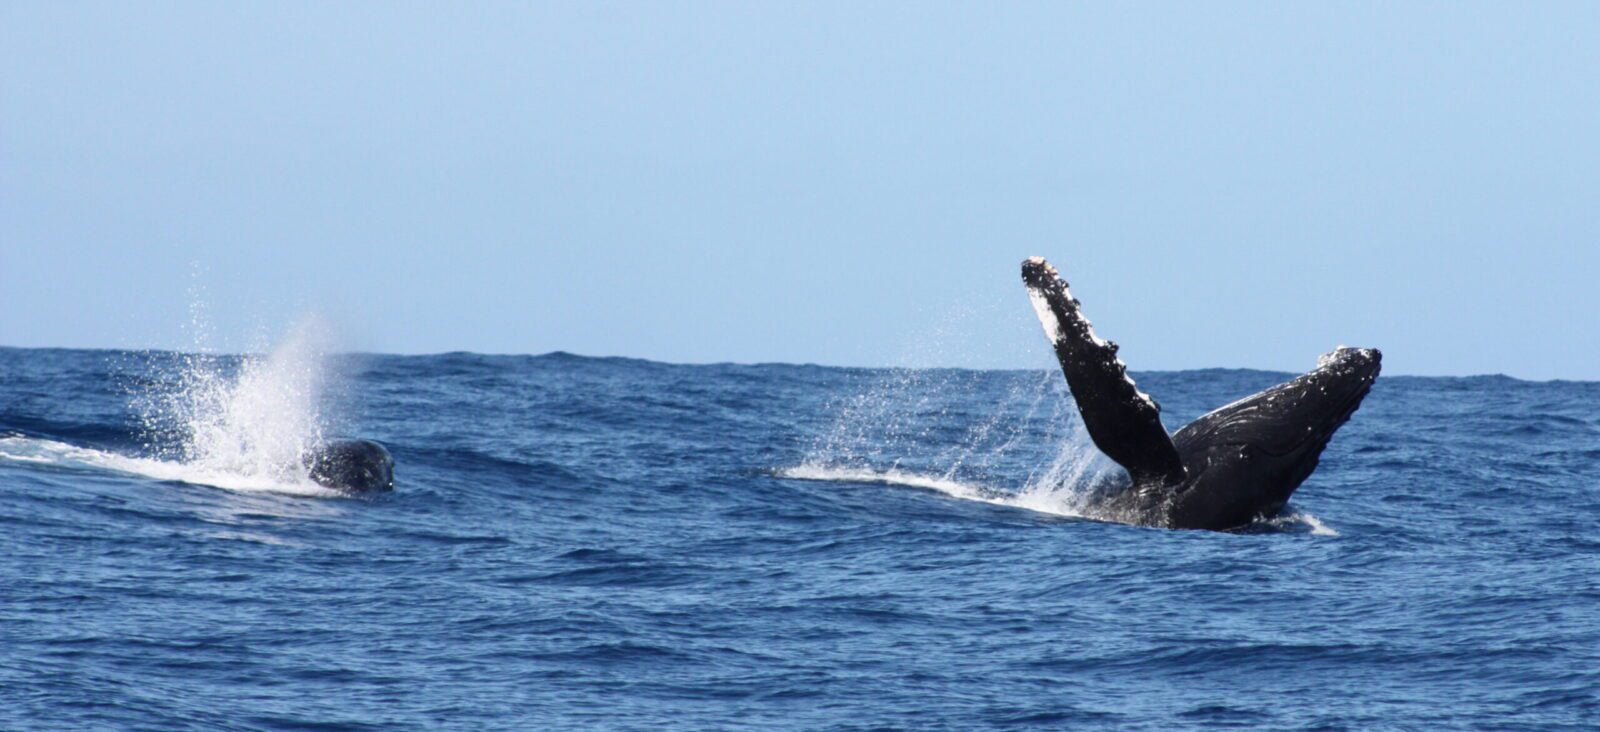 Two humpback whales breaching out of the water.